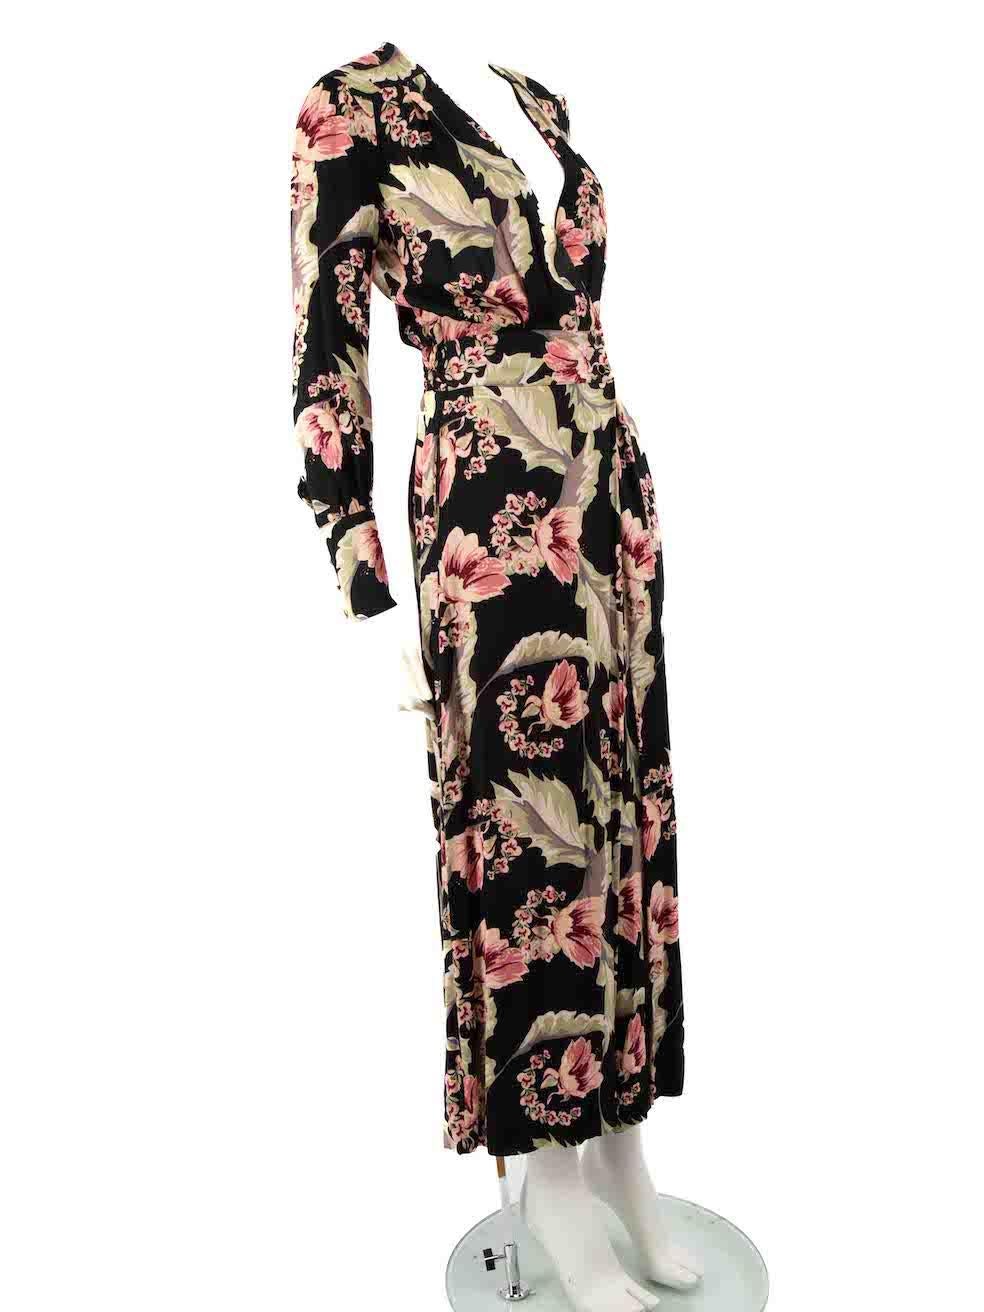 CONDITION is Very good. Minimal wear to jumpsuit is evident. Minimal discolouration mark to front waistline and internal right cuff on this used Temperley London designer resale item.
 
 
 
 Details
 
 
 Multicolour- black, pink, green
 
 Viscose
 
